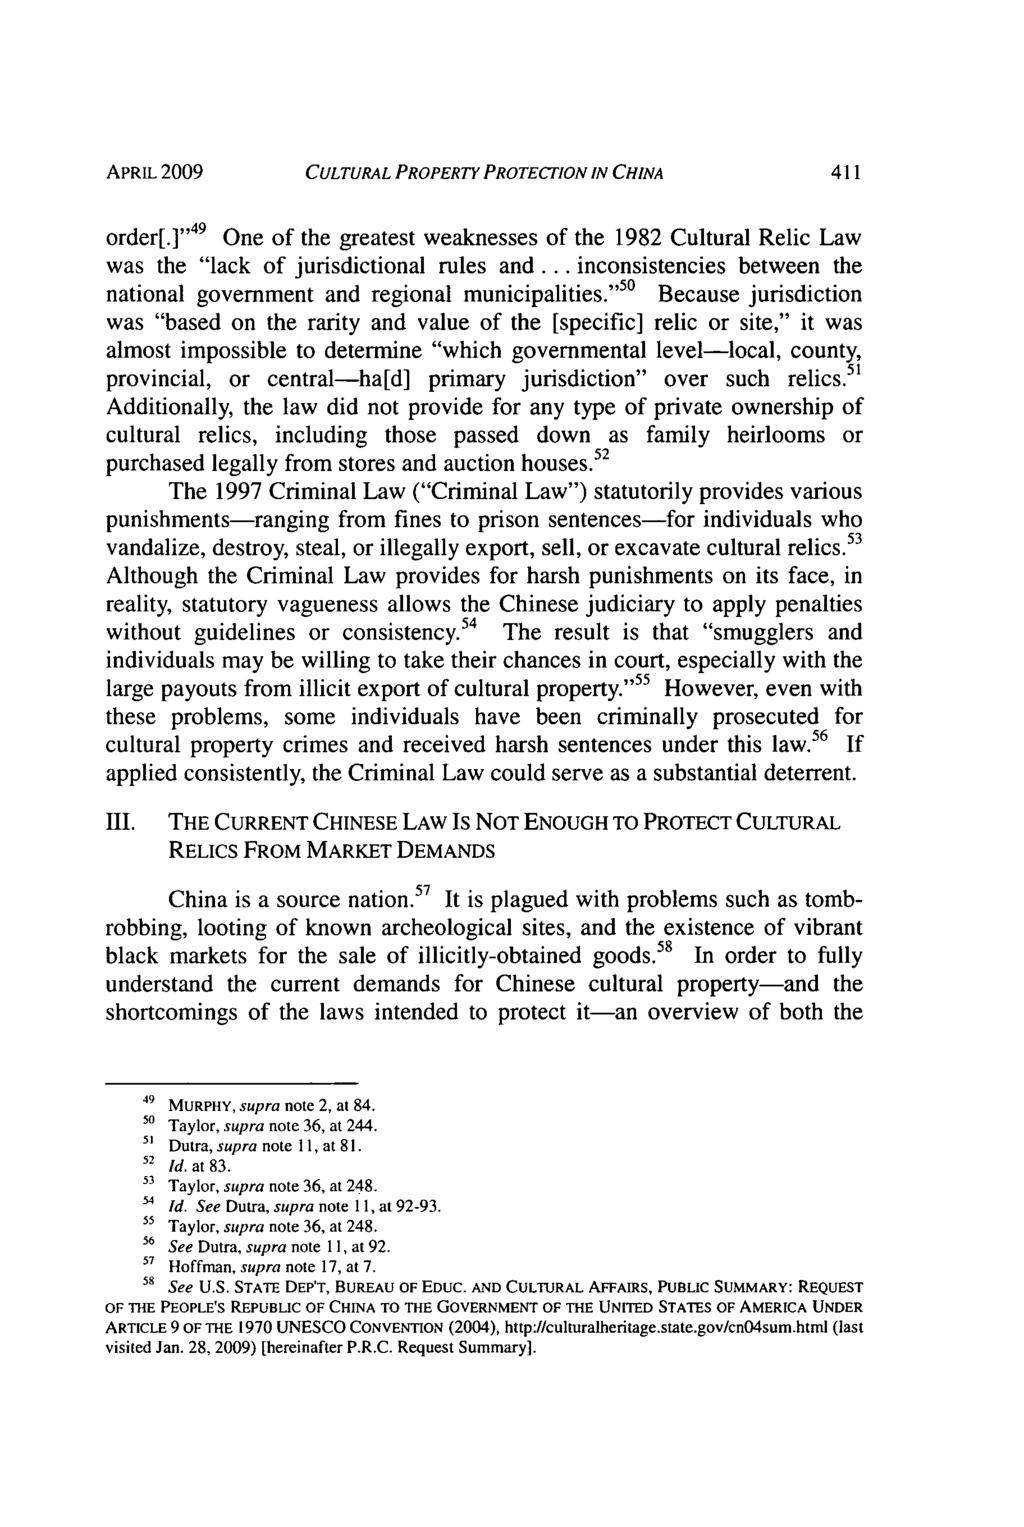 APRIL 2009 CULTURAL PROPERTY PROTECTION IN CHINA order[.],, 49 One of the greatest weaknesses of the 1982 Cultural Relic Law was the "lack of jurisdictional rules and.